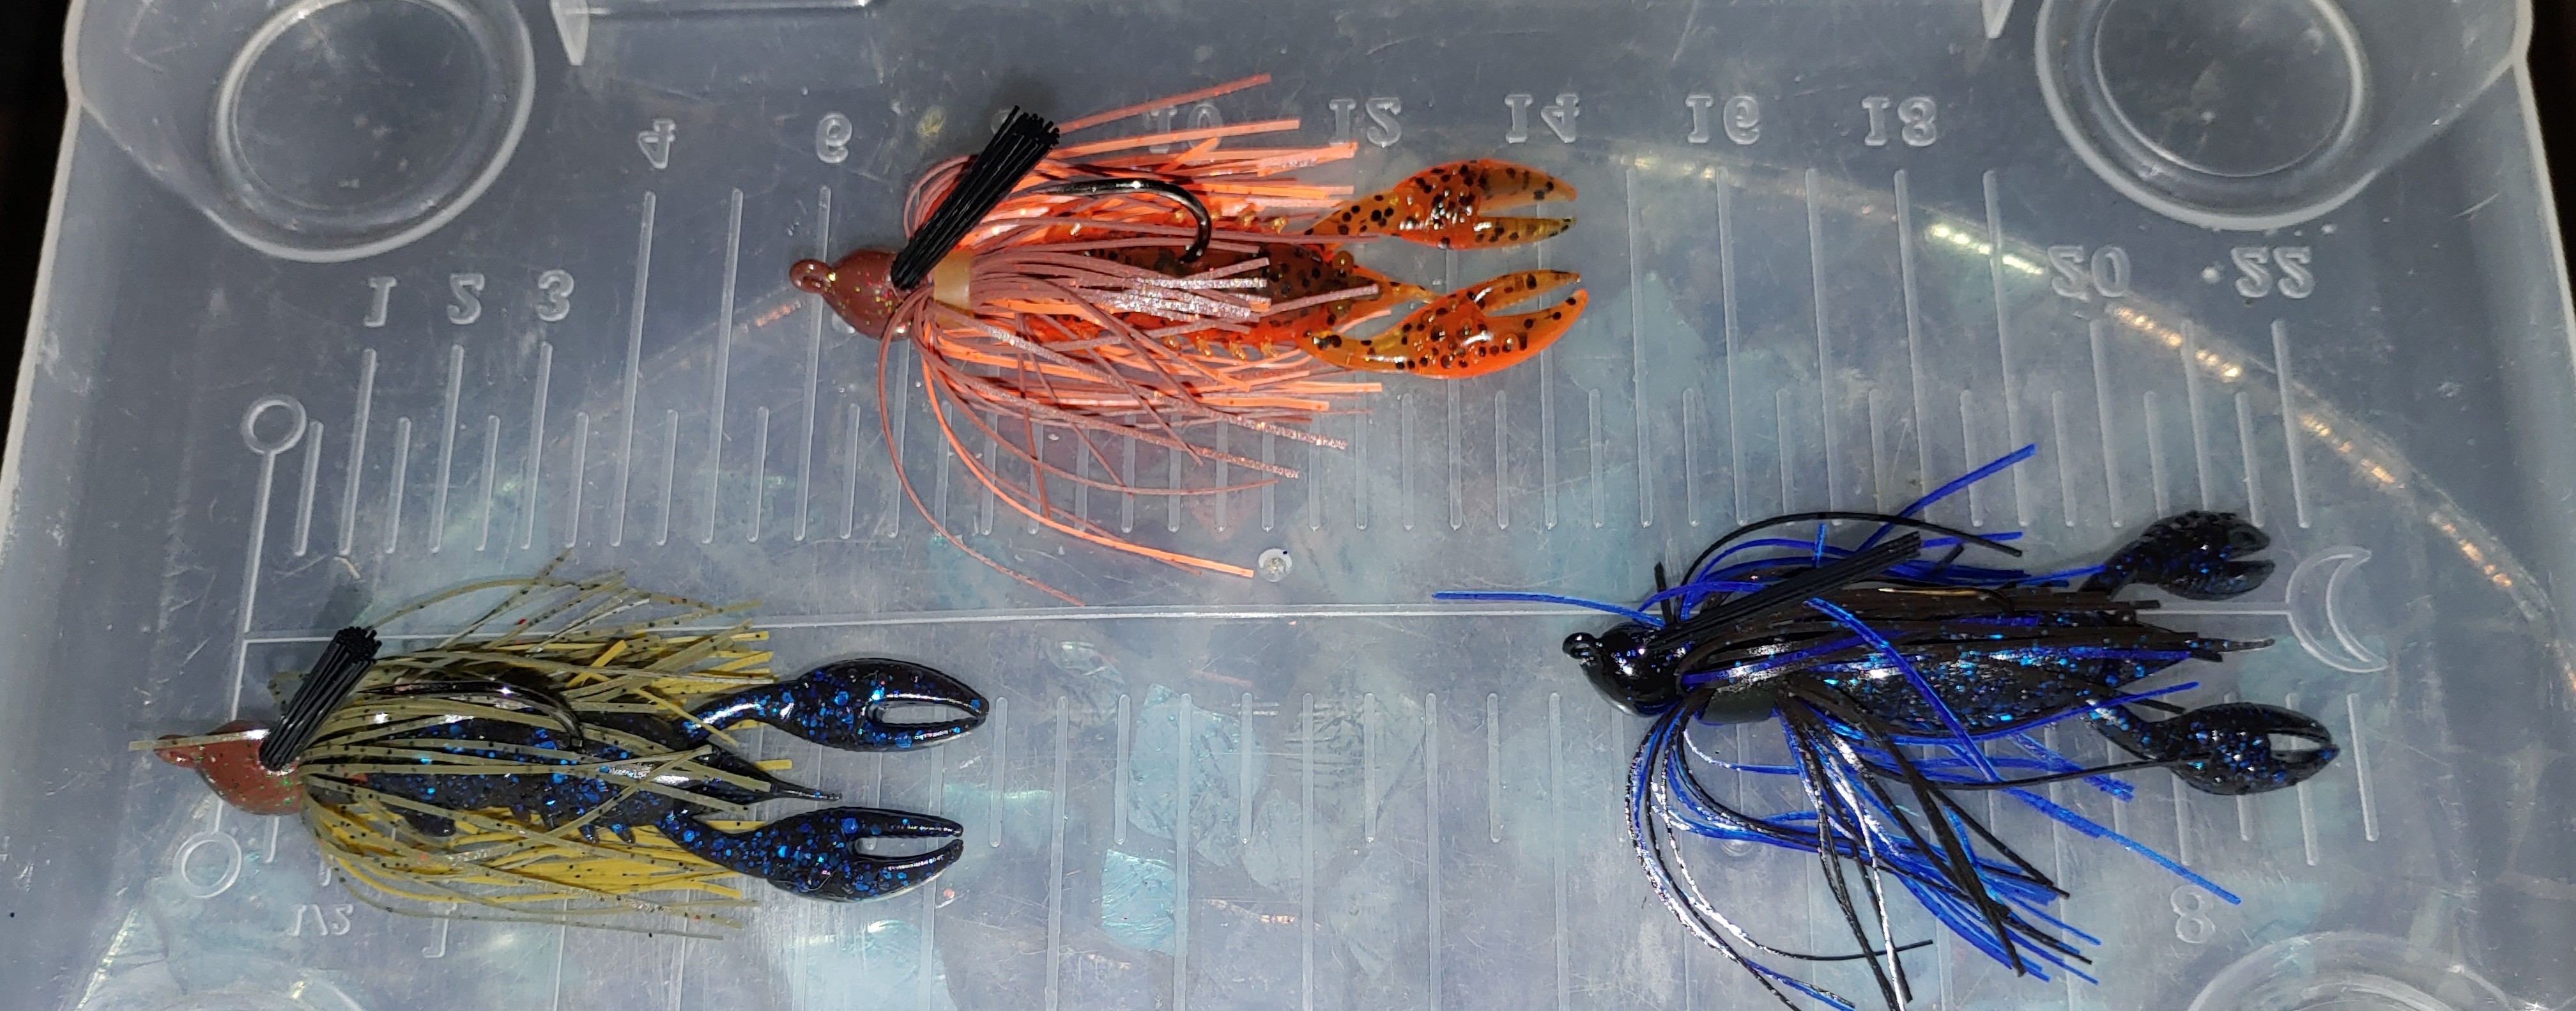 Jig Trailer Accent Color? - Fishing Tackle - Bass Fishing Forums